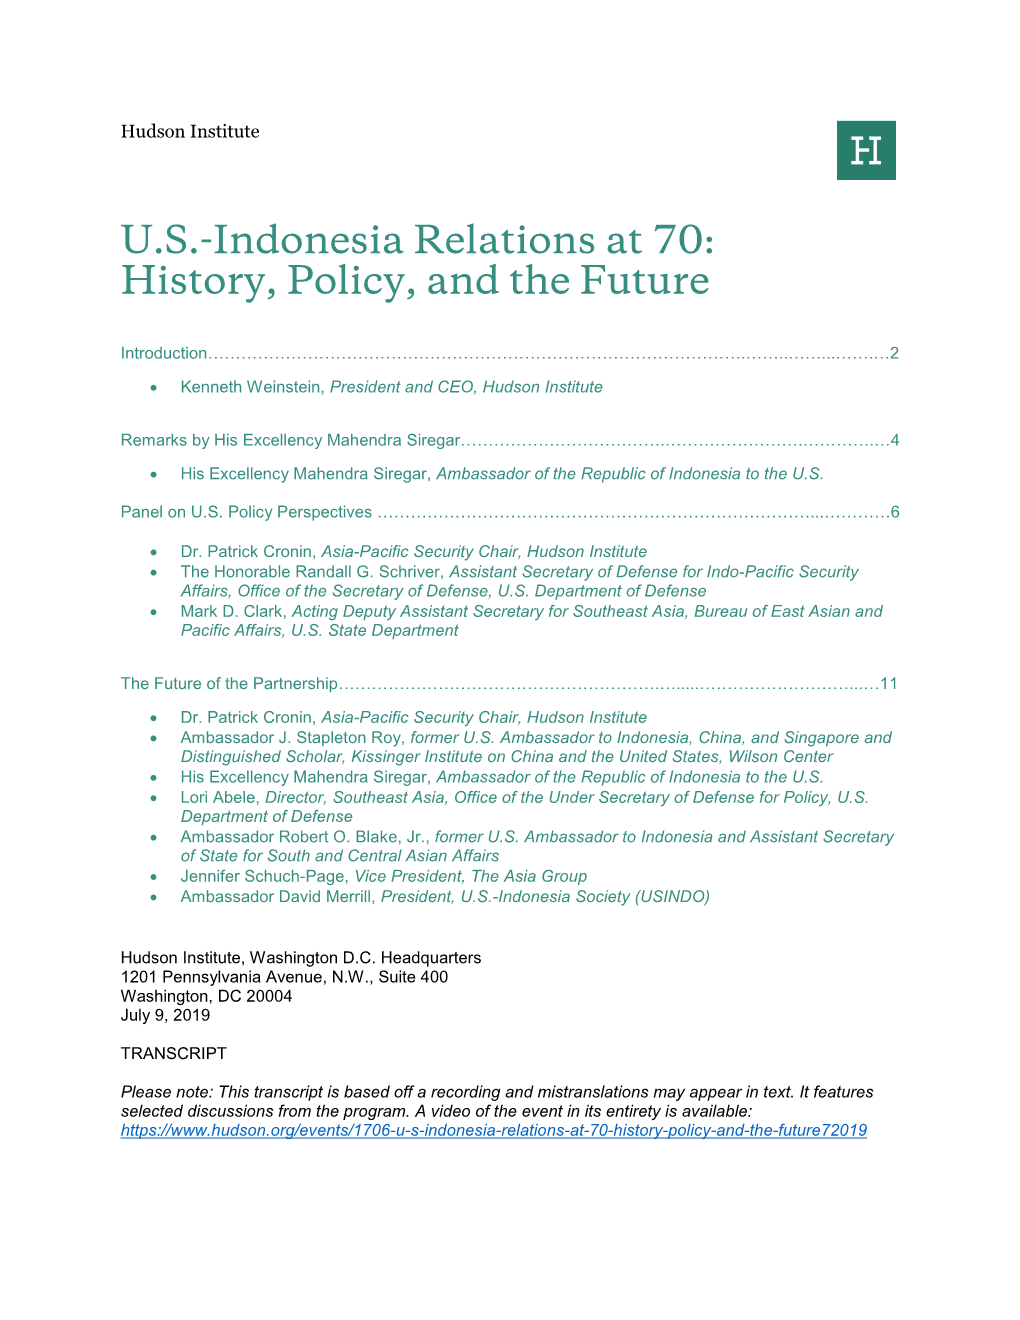 U.S.-Indonesia Relations at 70: History, Policy, and the Future